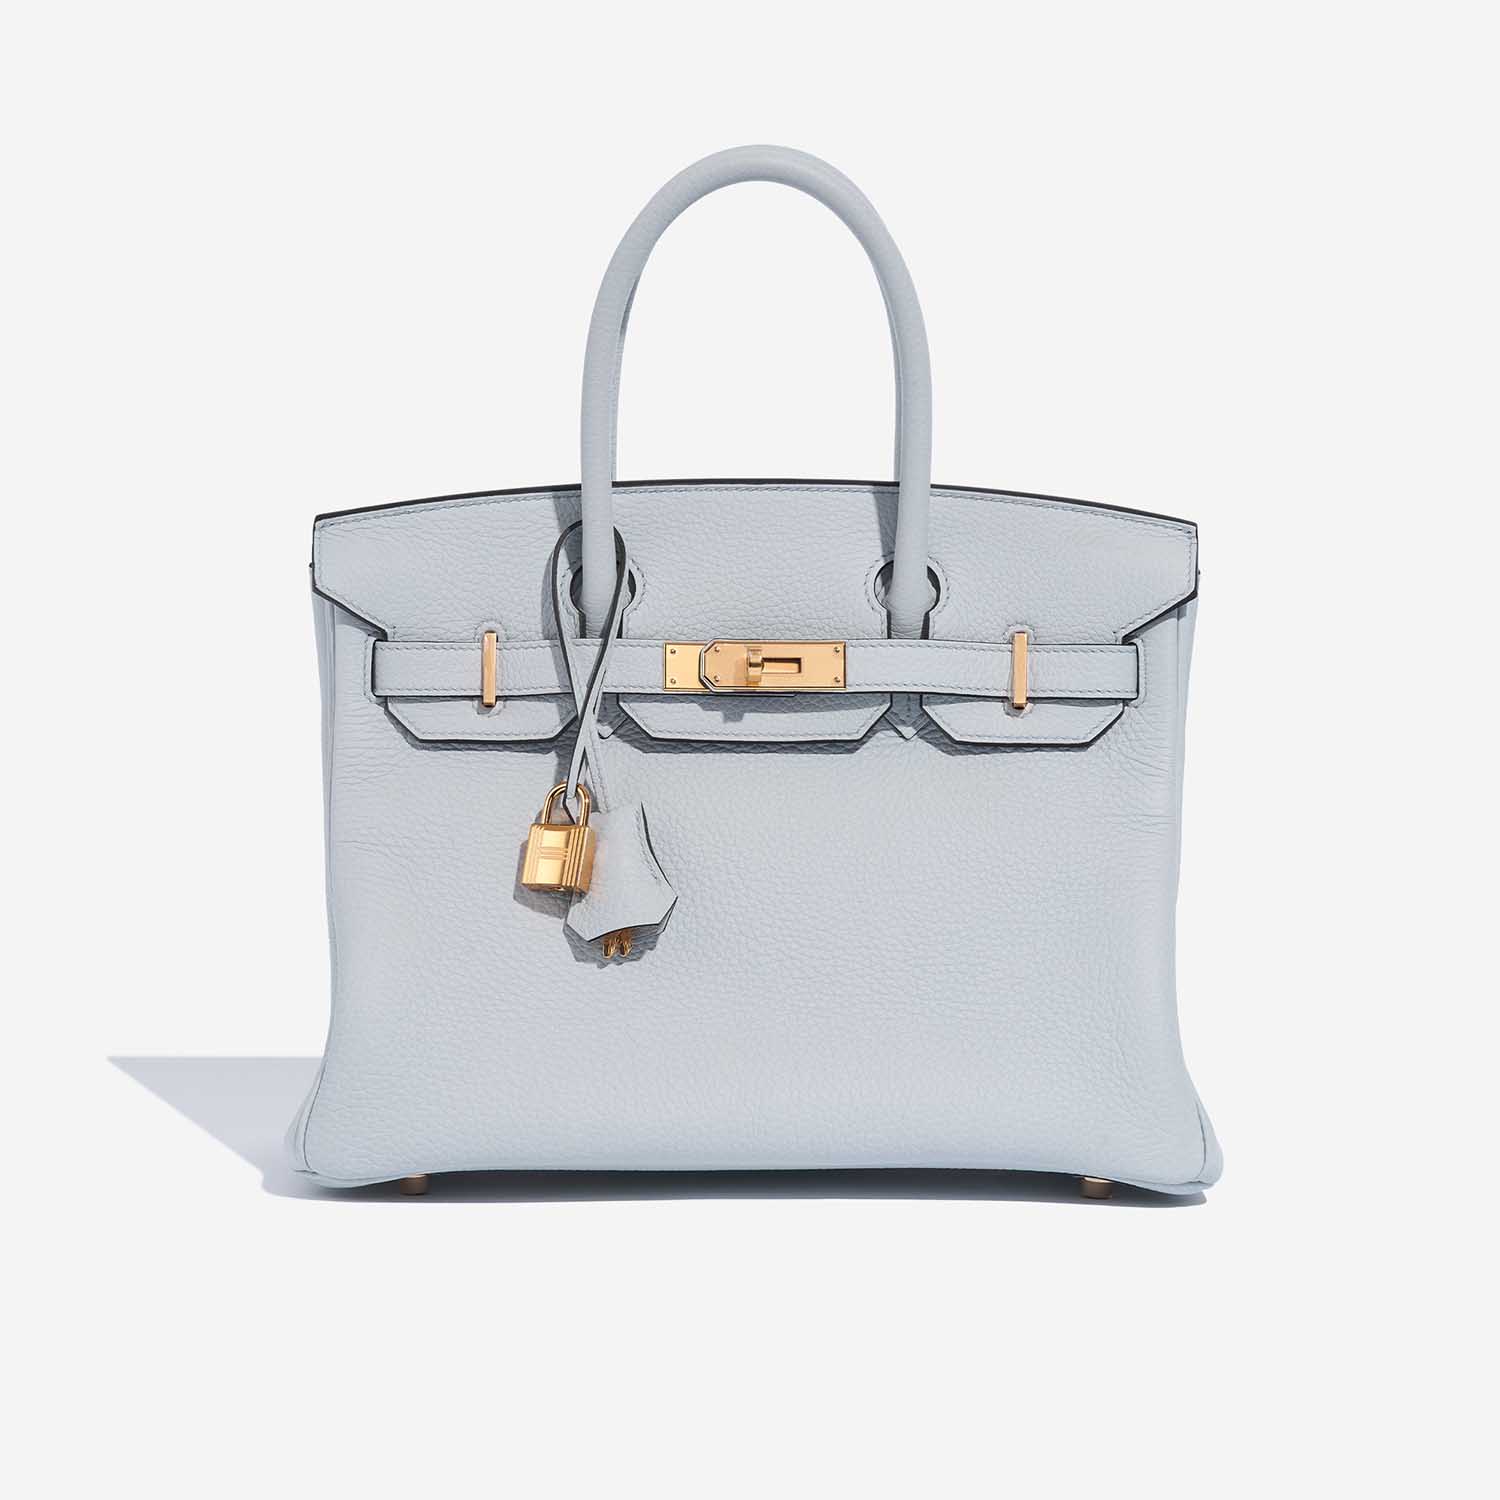 A rare and stunning Hermes Birkin in the most coverted size 30, made from  the most durable Clemence leather! Ciel or Pale Blue is…